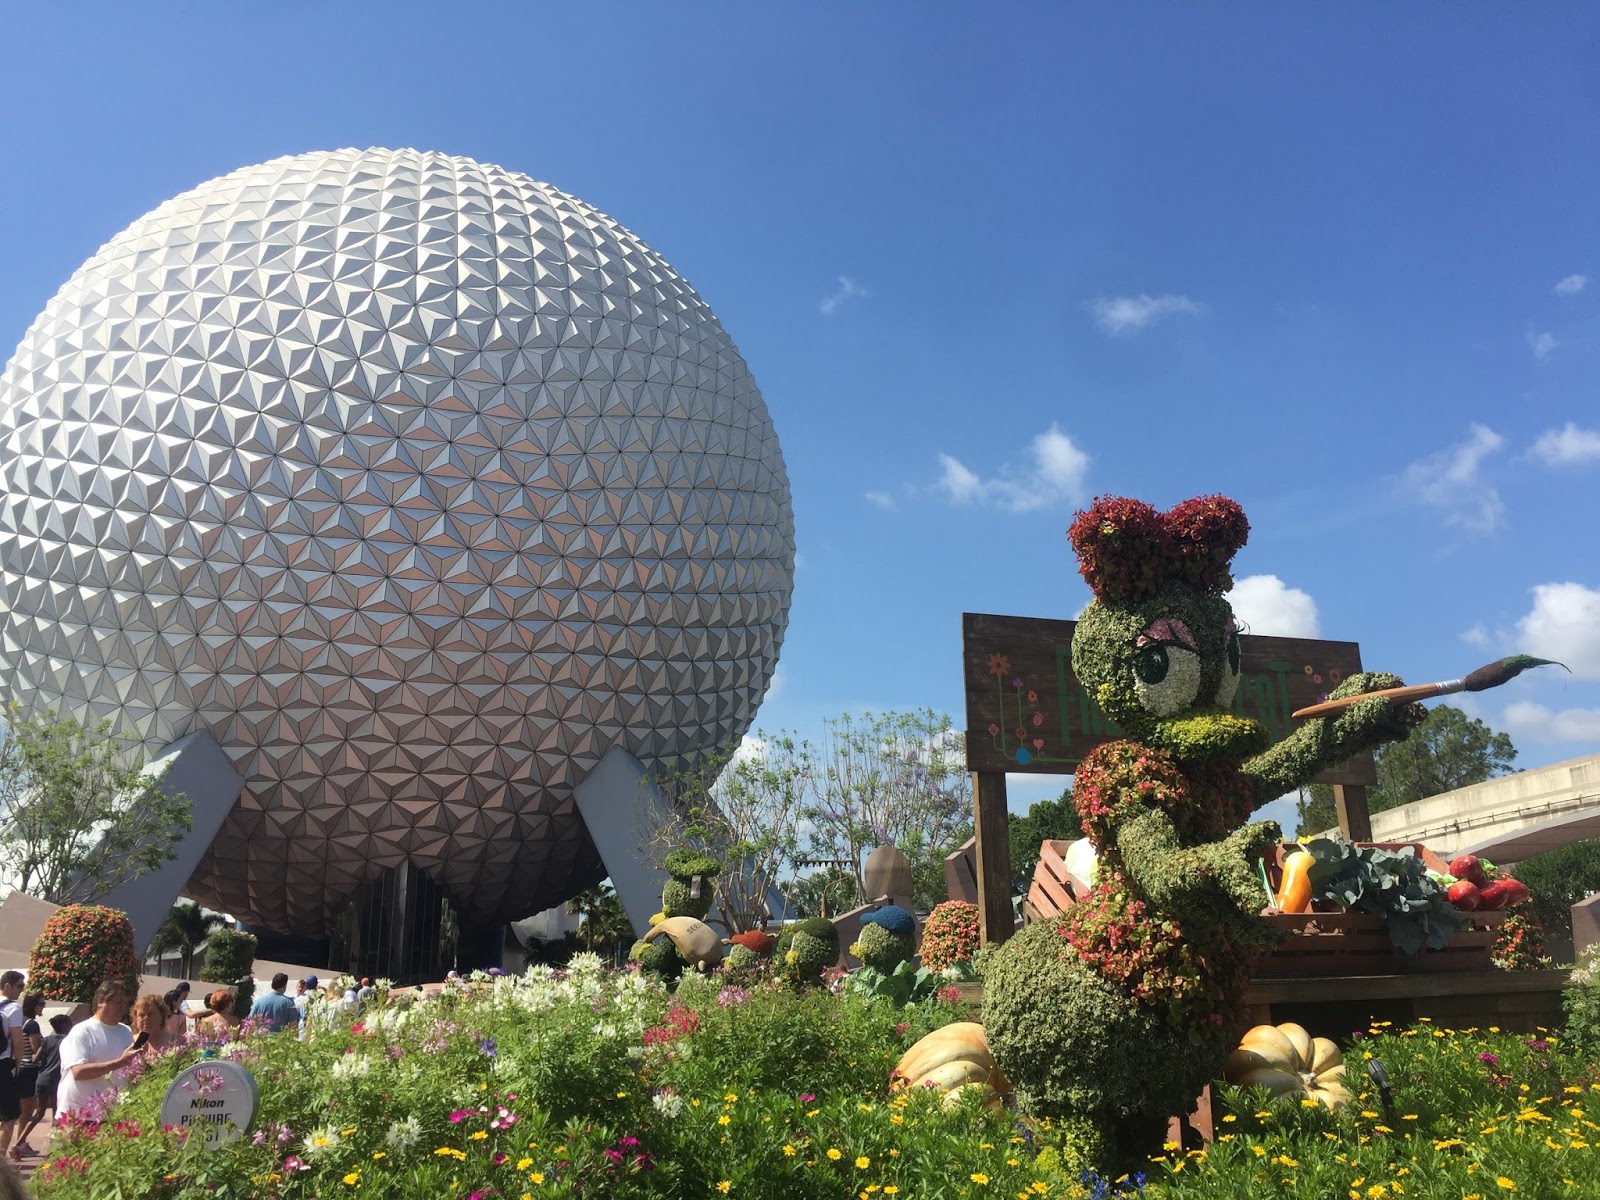 The NYC Traveler: 5 Reasons to Visit Epcot